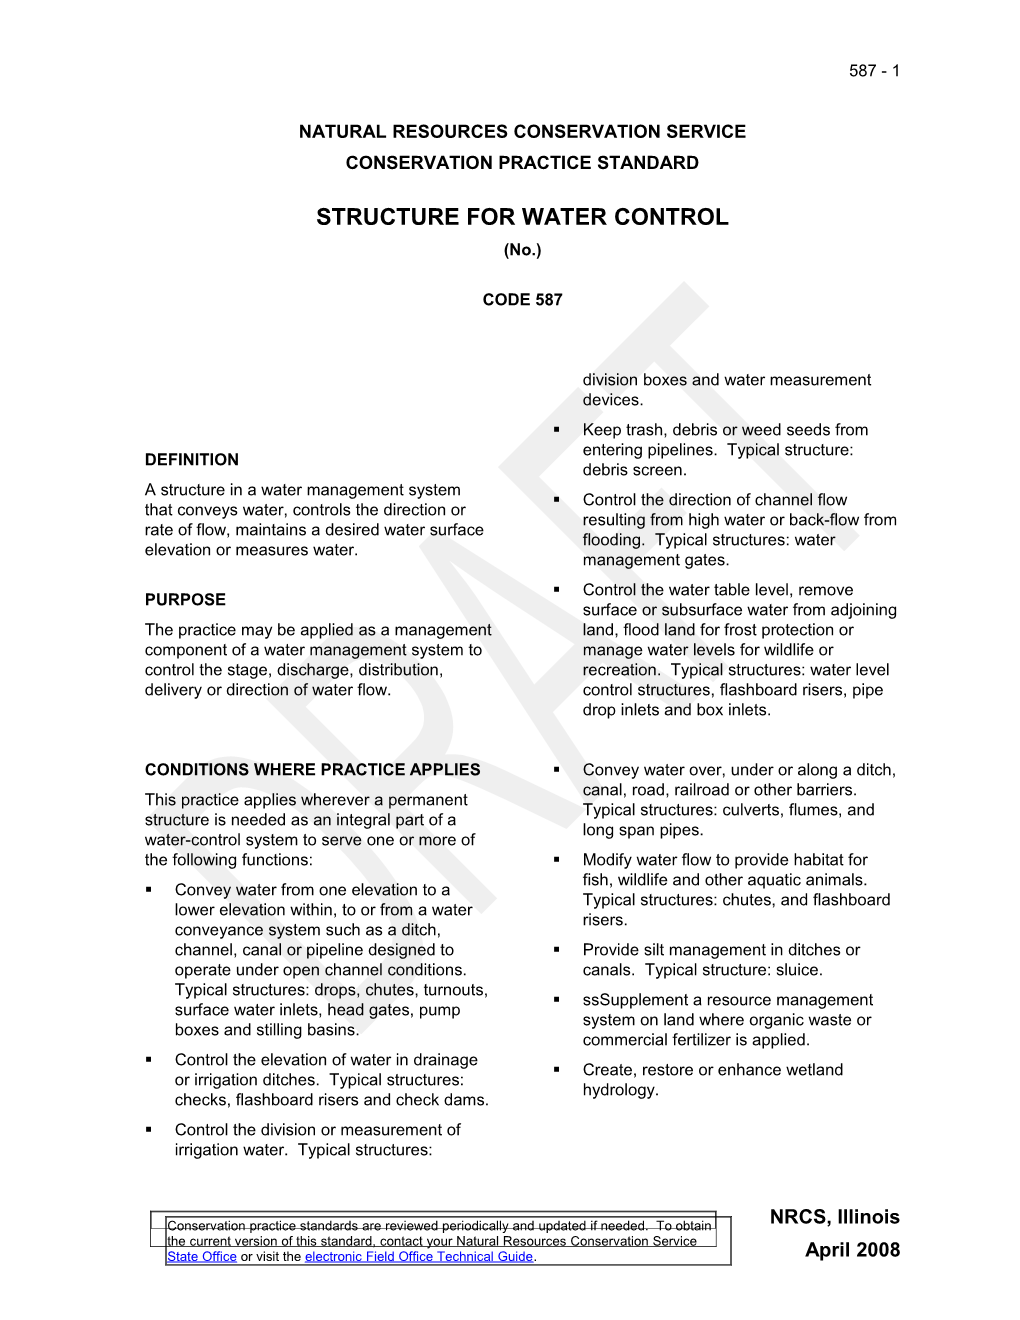 Structure for Water Control 587